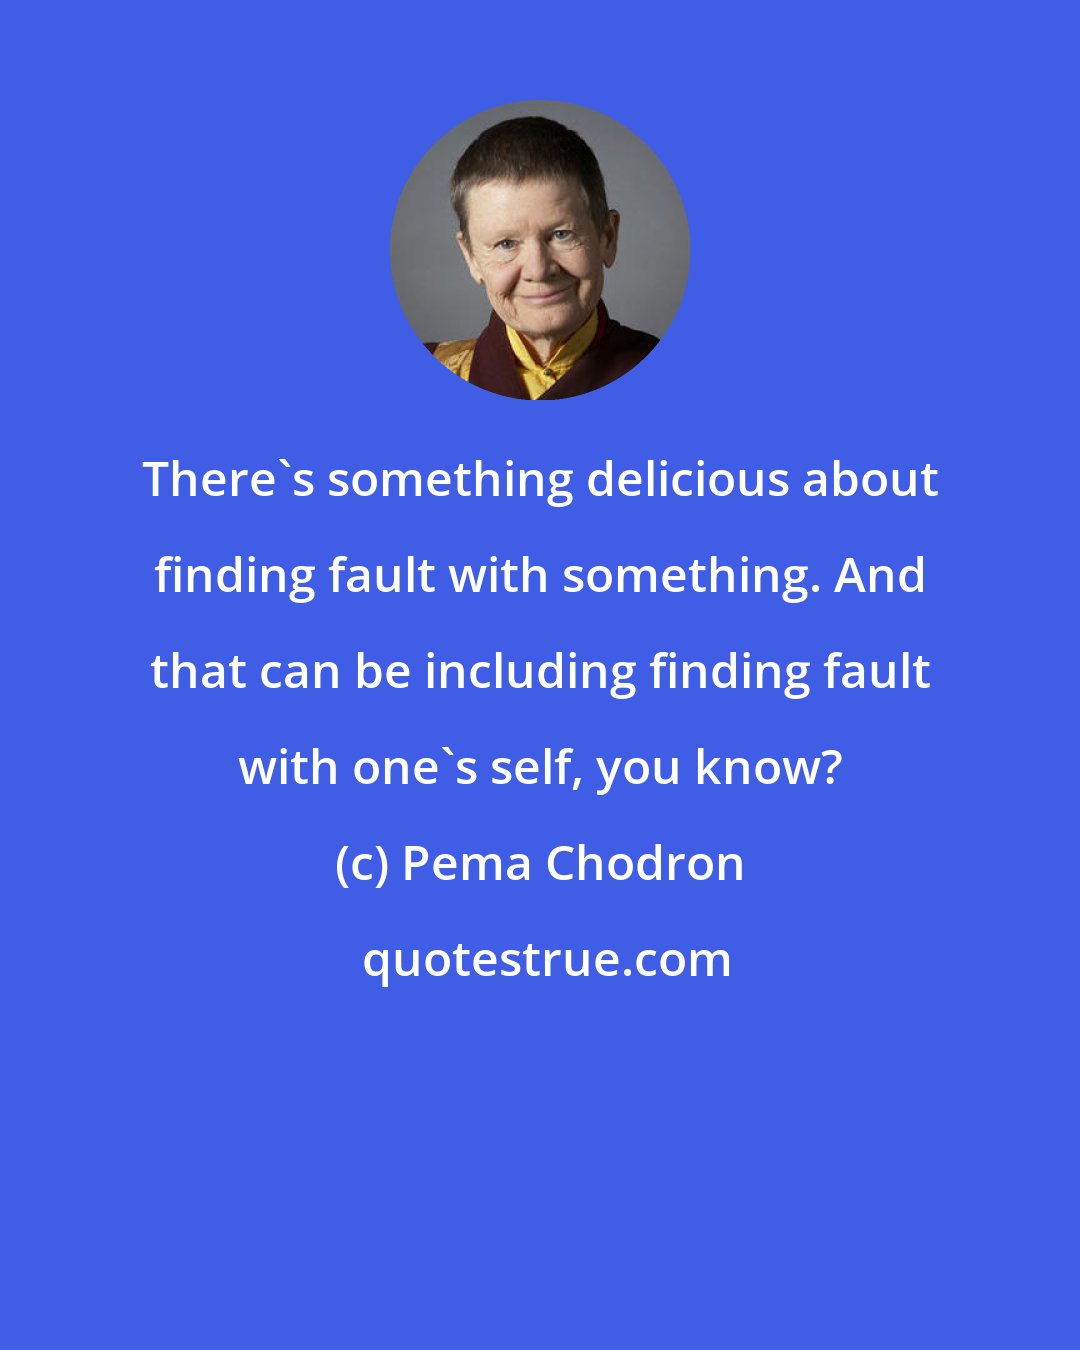 Pema Chodron: There's something delicious about finding fault with something. And that can be including finding fault with one's self, you know?